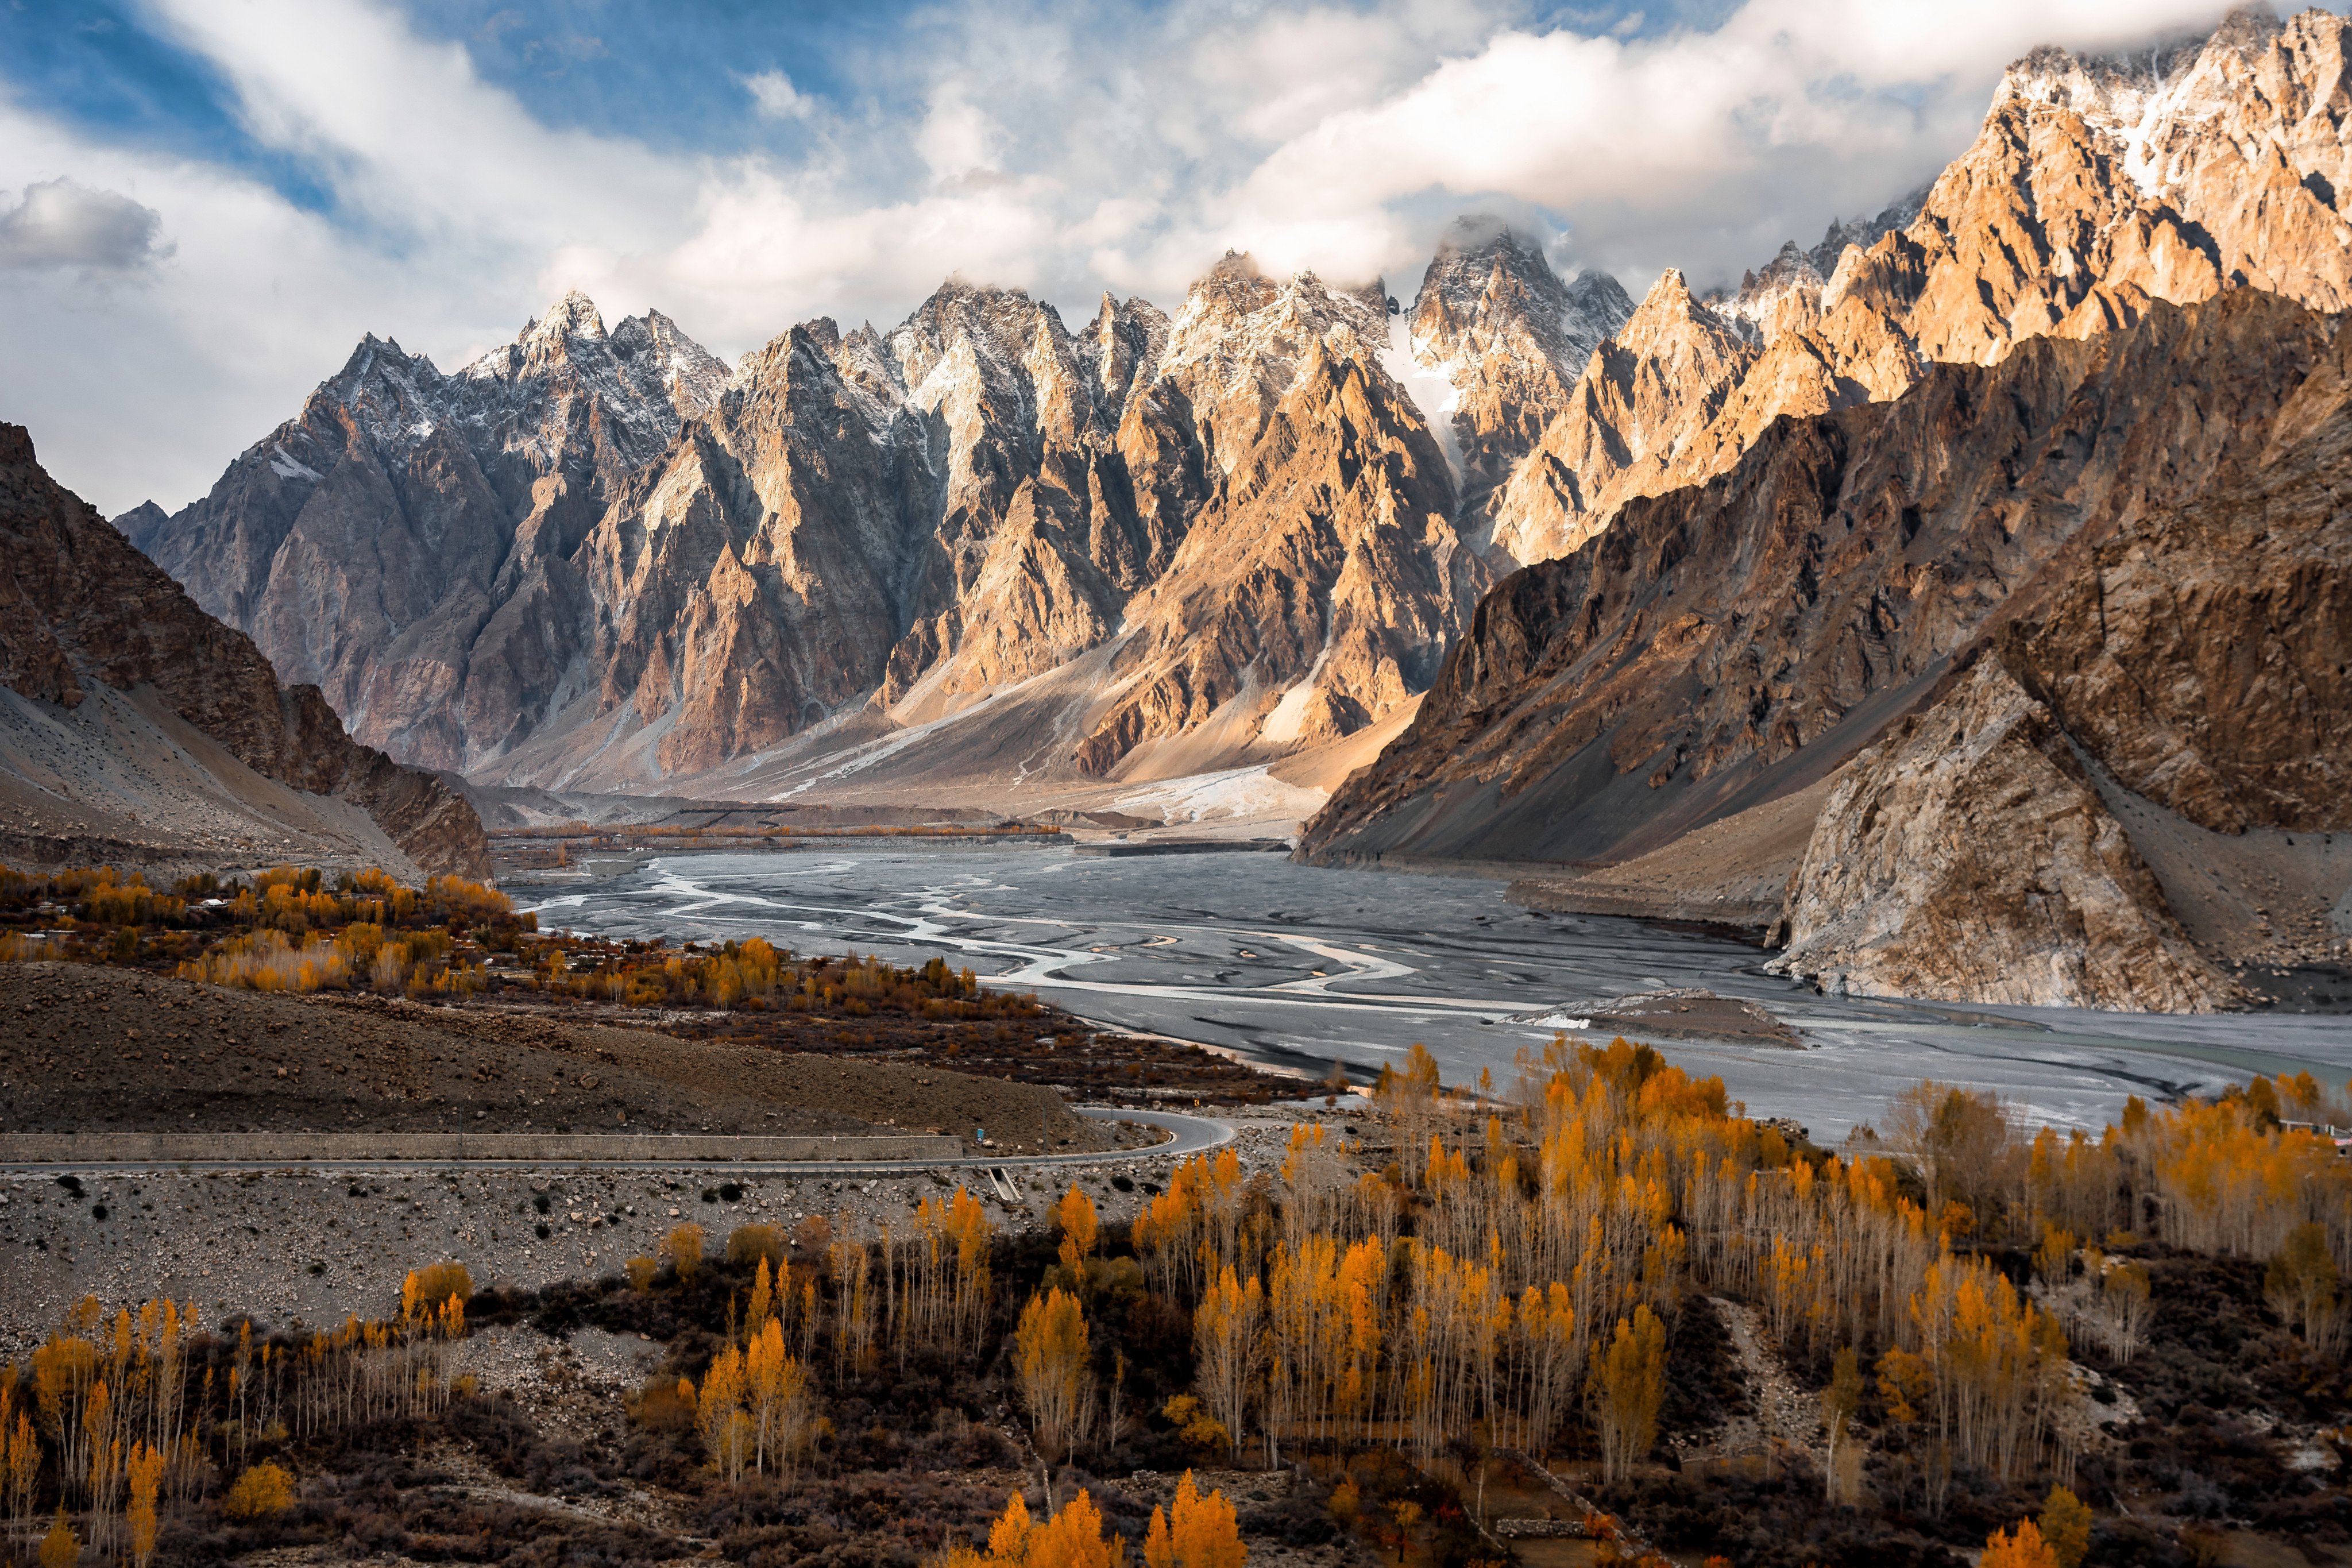 A section of the Karakoram Highway in the Passu Valley with views of the Hunza River and Karakoram mountain range. A trip along the 1,300km-long road is a feast for the eyes, but there are some downsides. Photo: Getty Images